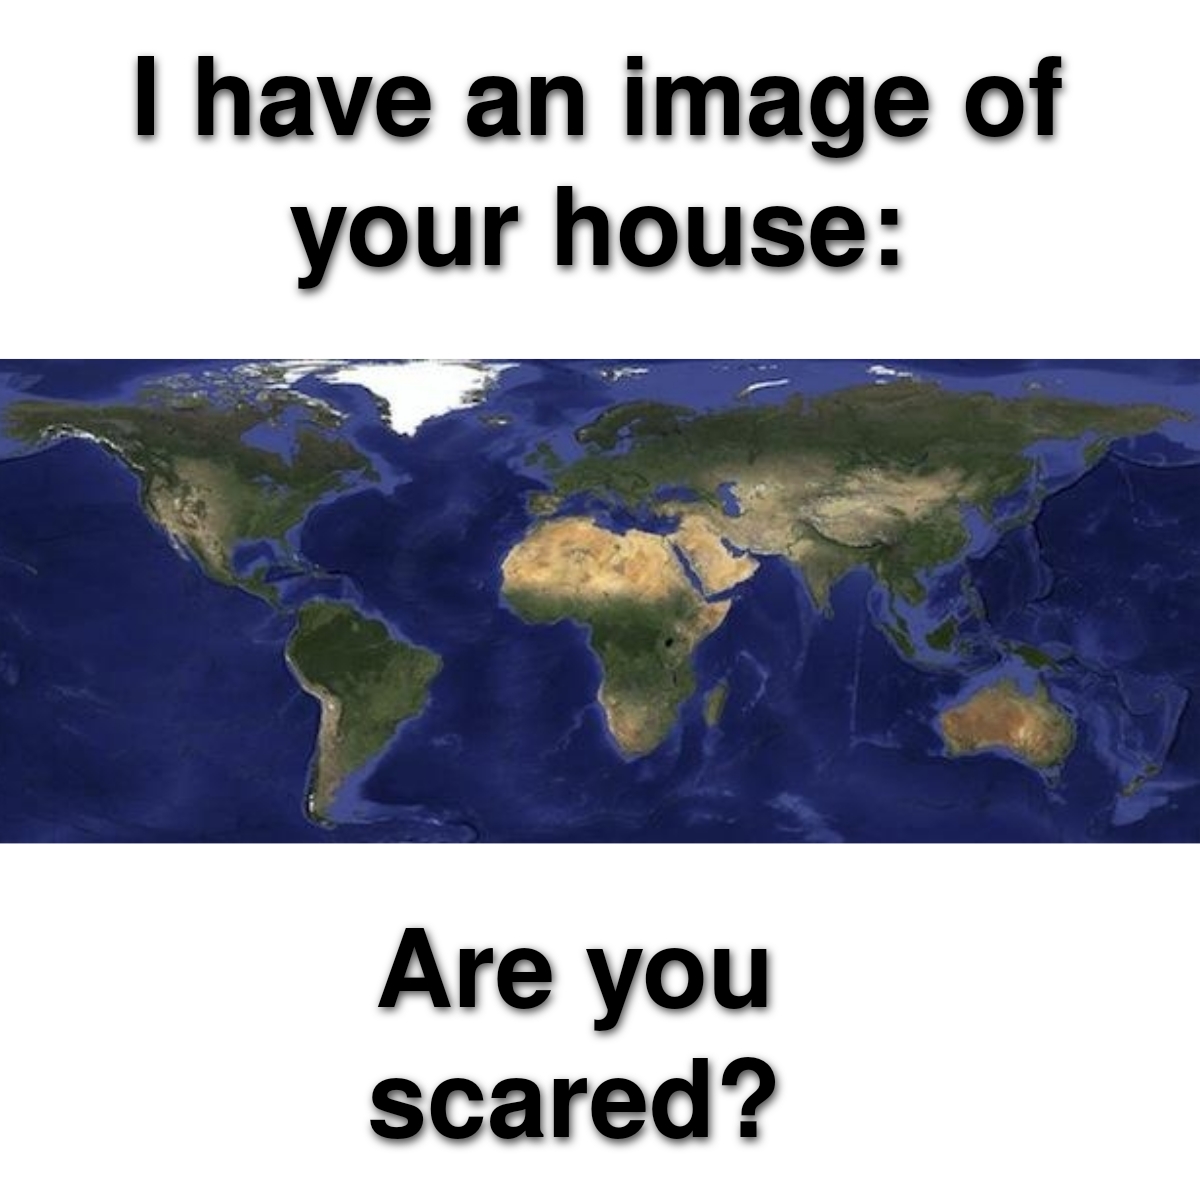 world map - I have an image of your house Are you scared?